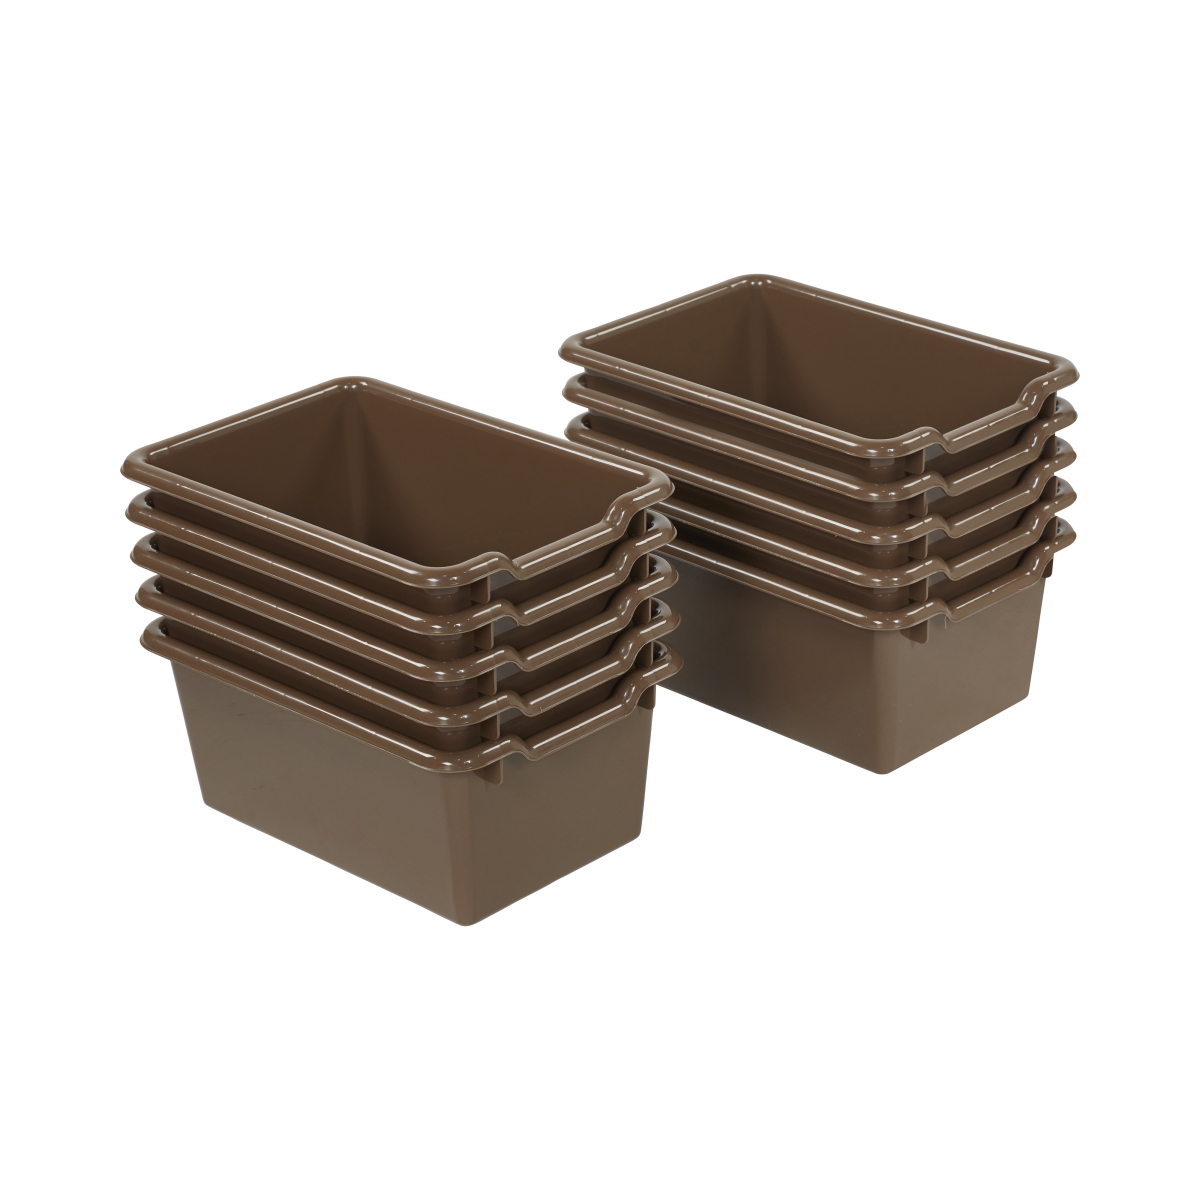 S Elr-0482-ch Scoop Front Storage Bins, Chocolate - Pack Of 10